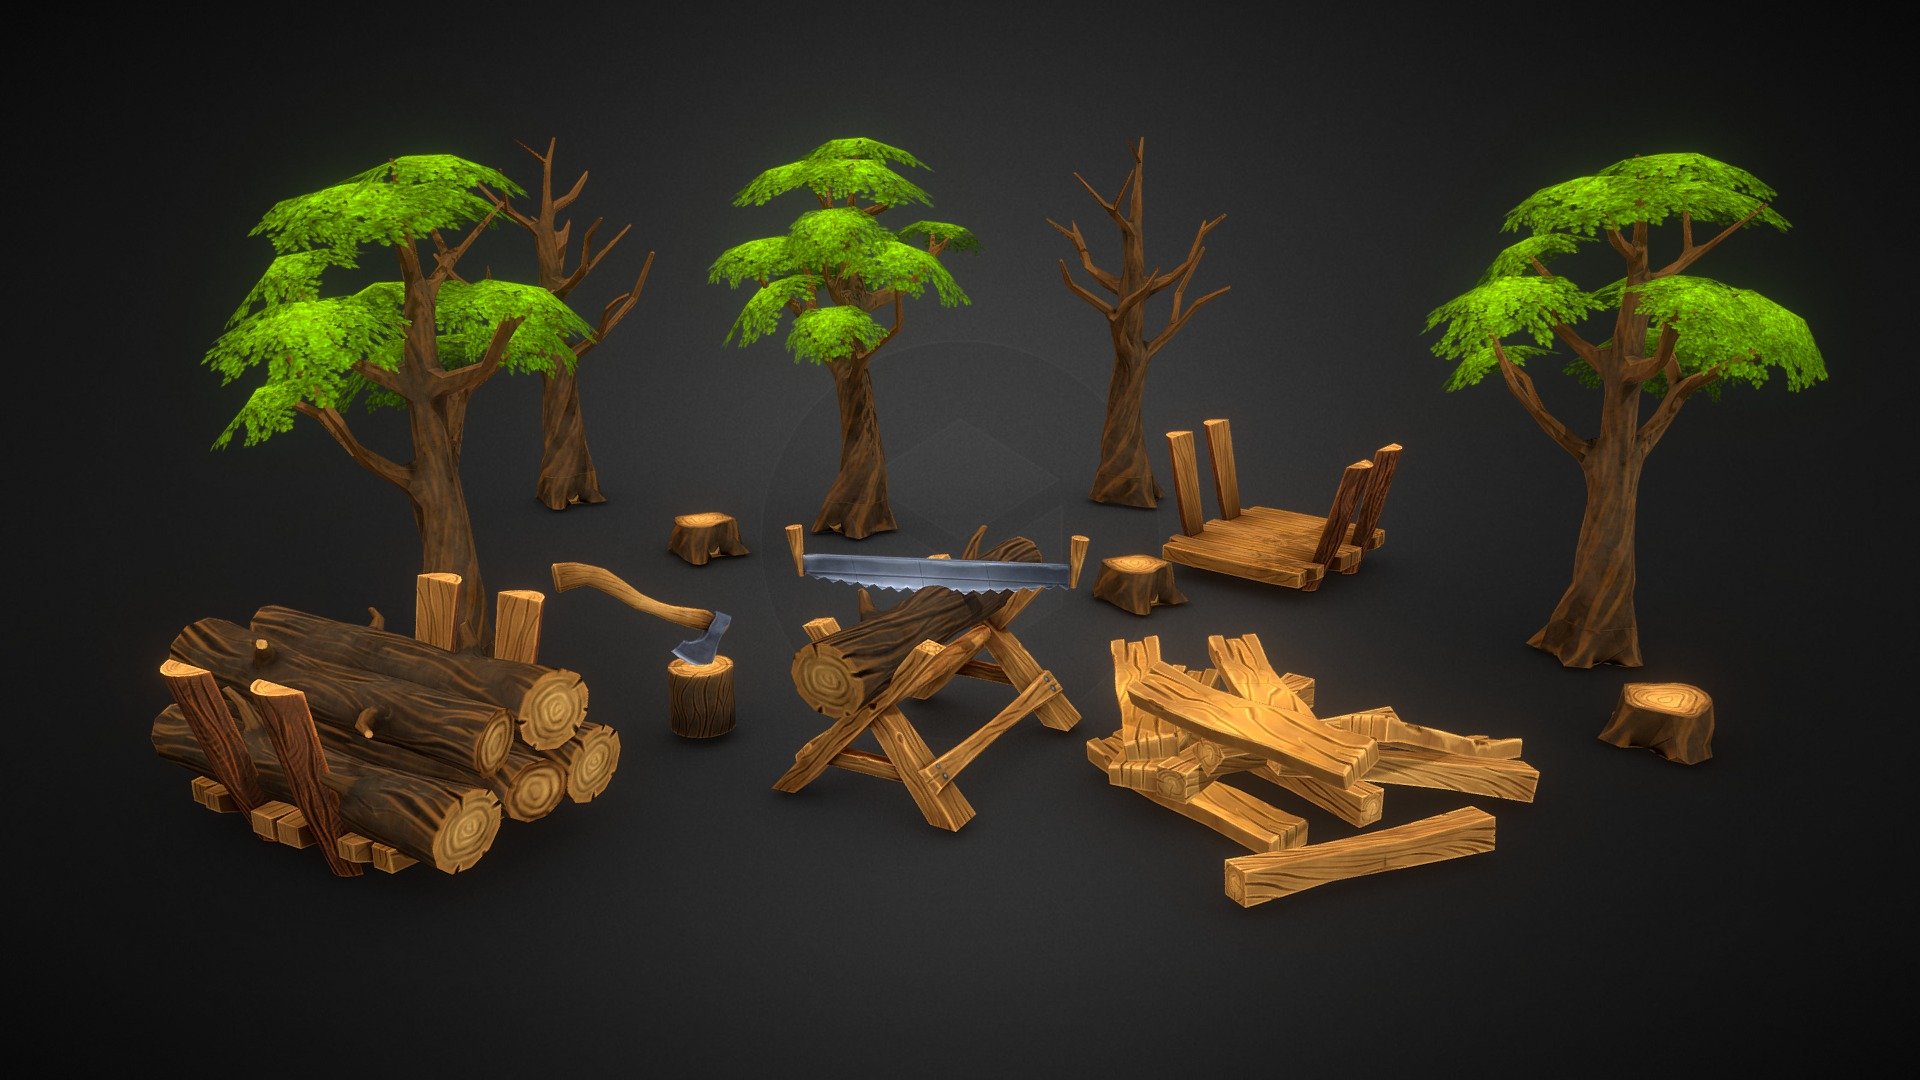 wood mining asset for mobile games, each object has a separate texture - Wood extraction - 3D model by LowPoly89 (@omega3) 3d model